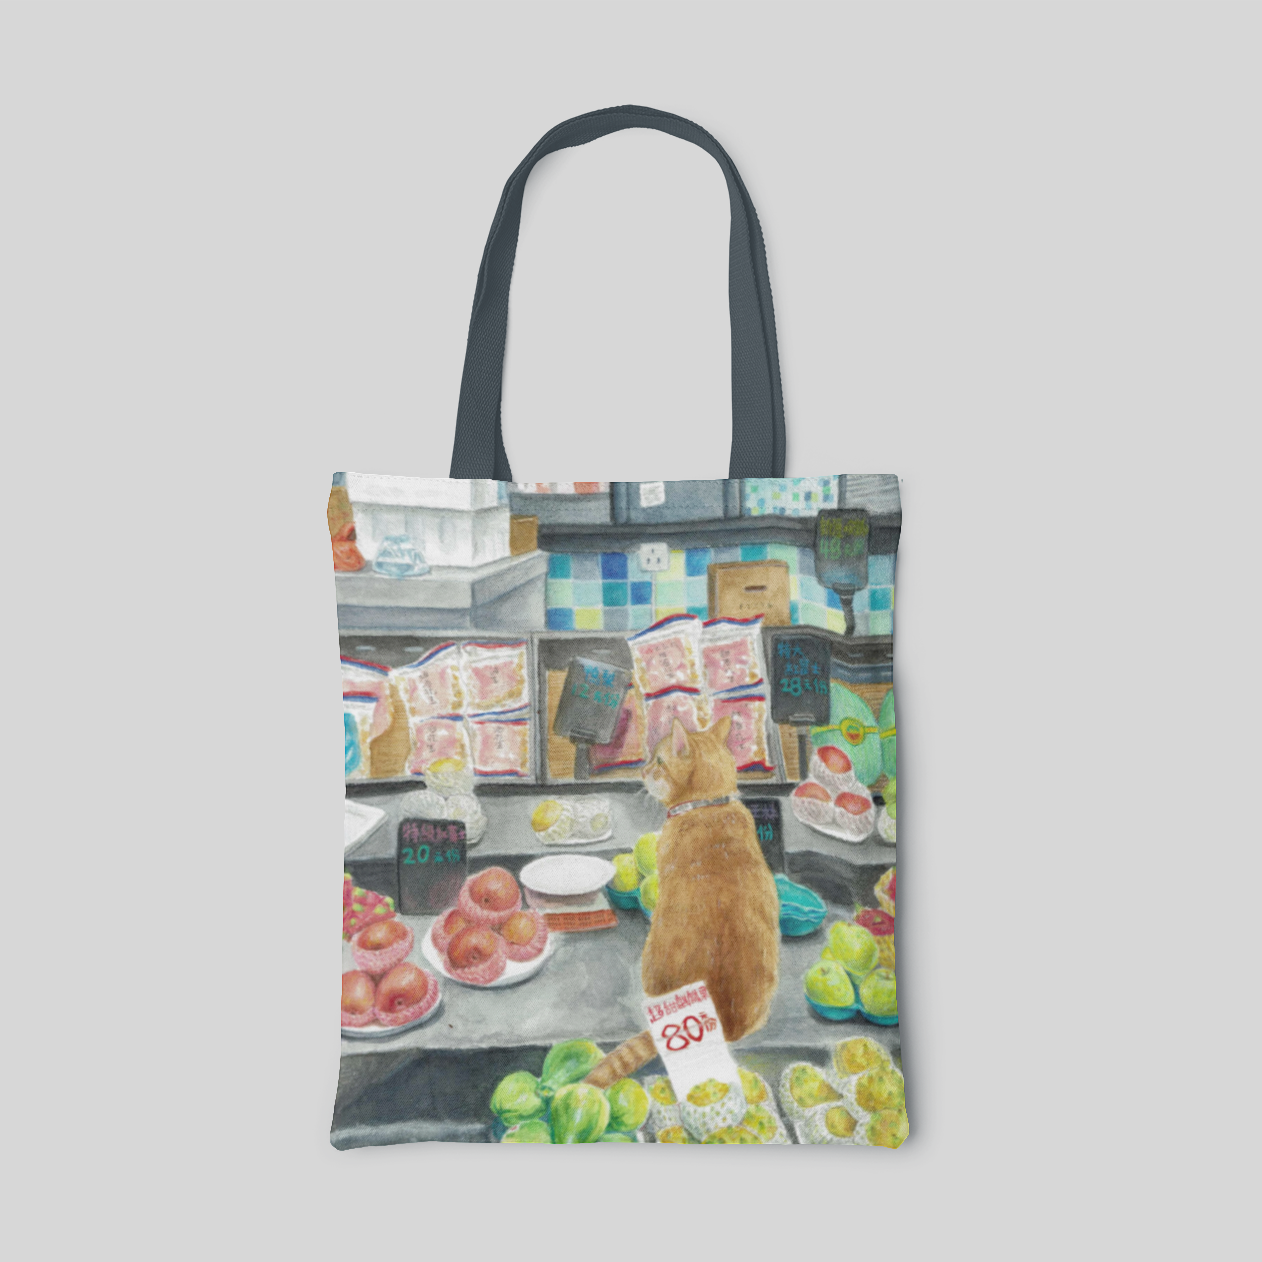 urban designed dark tote bag with yellow cat managing the fruit store in wet market, front side